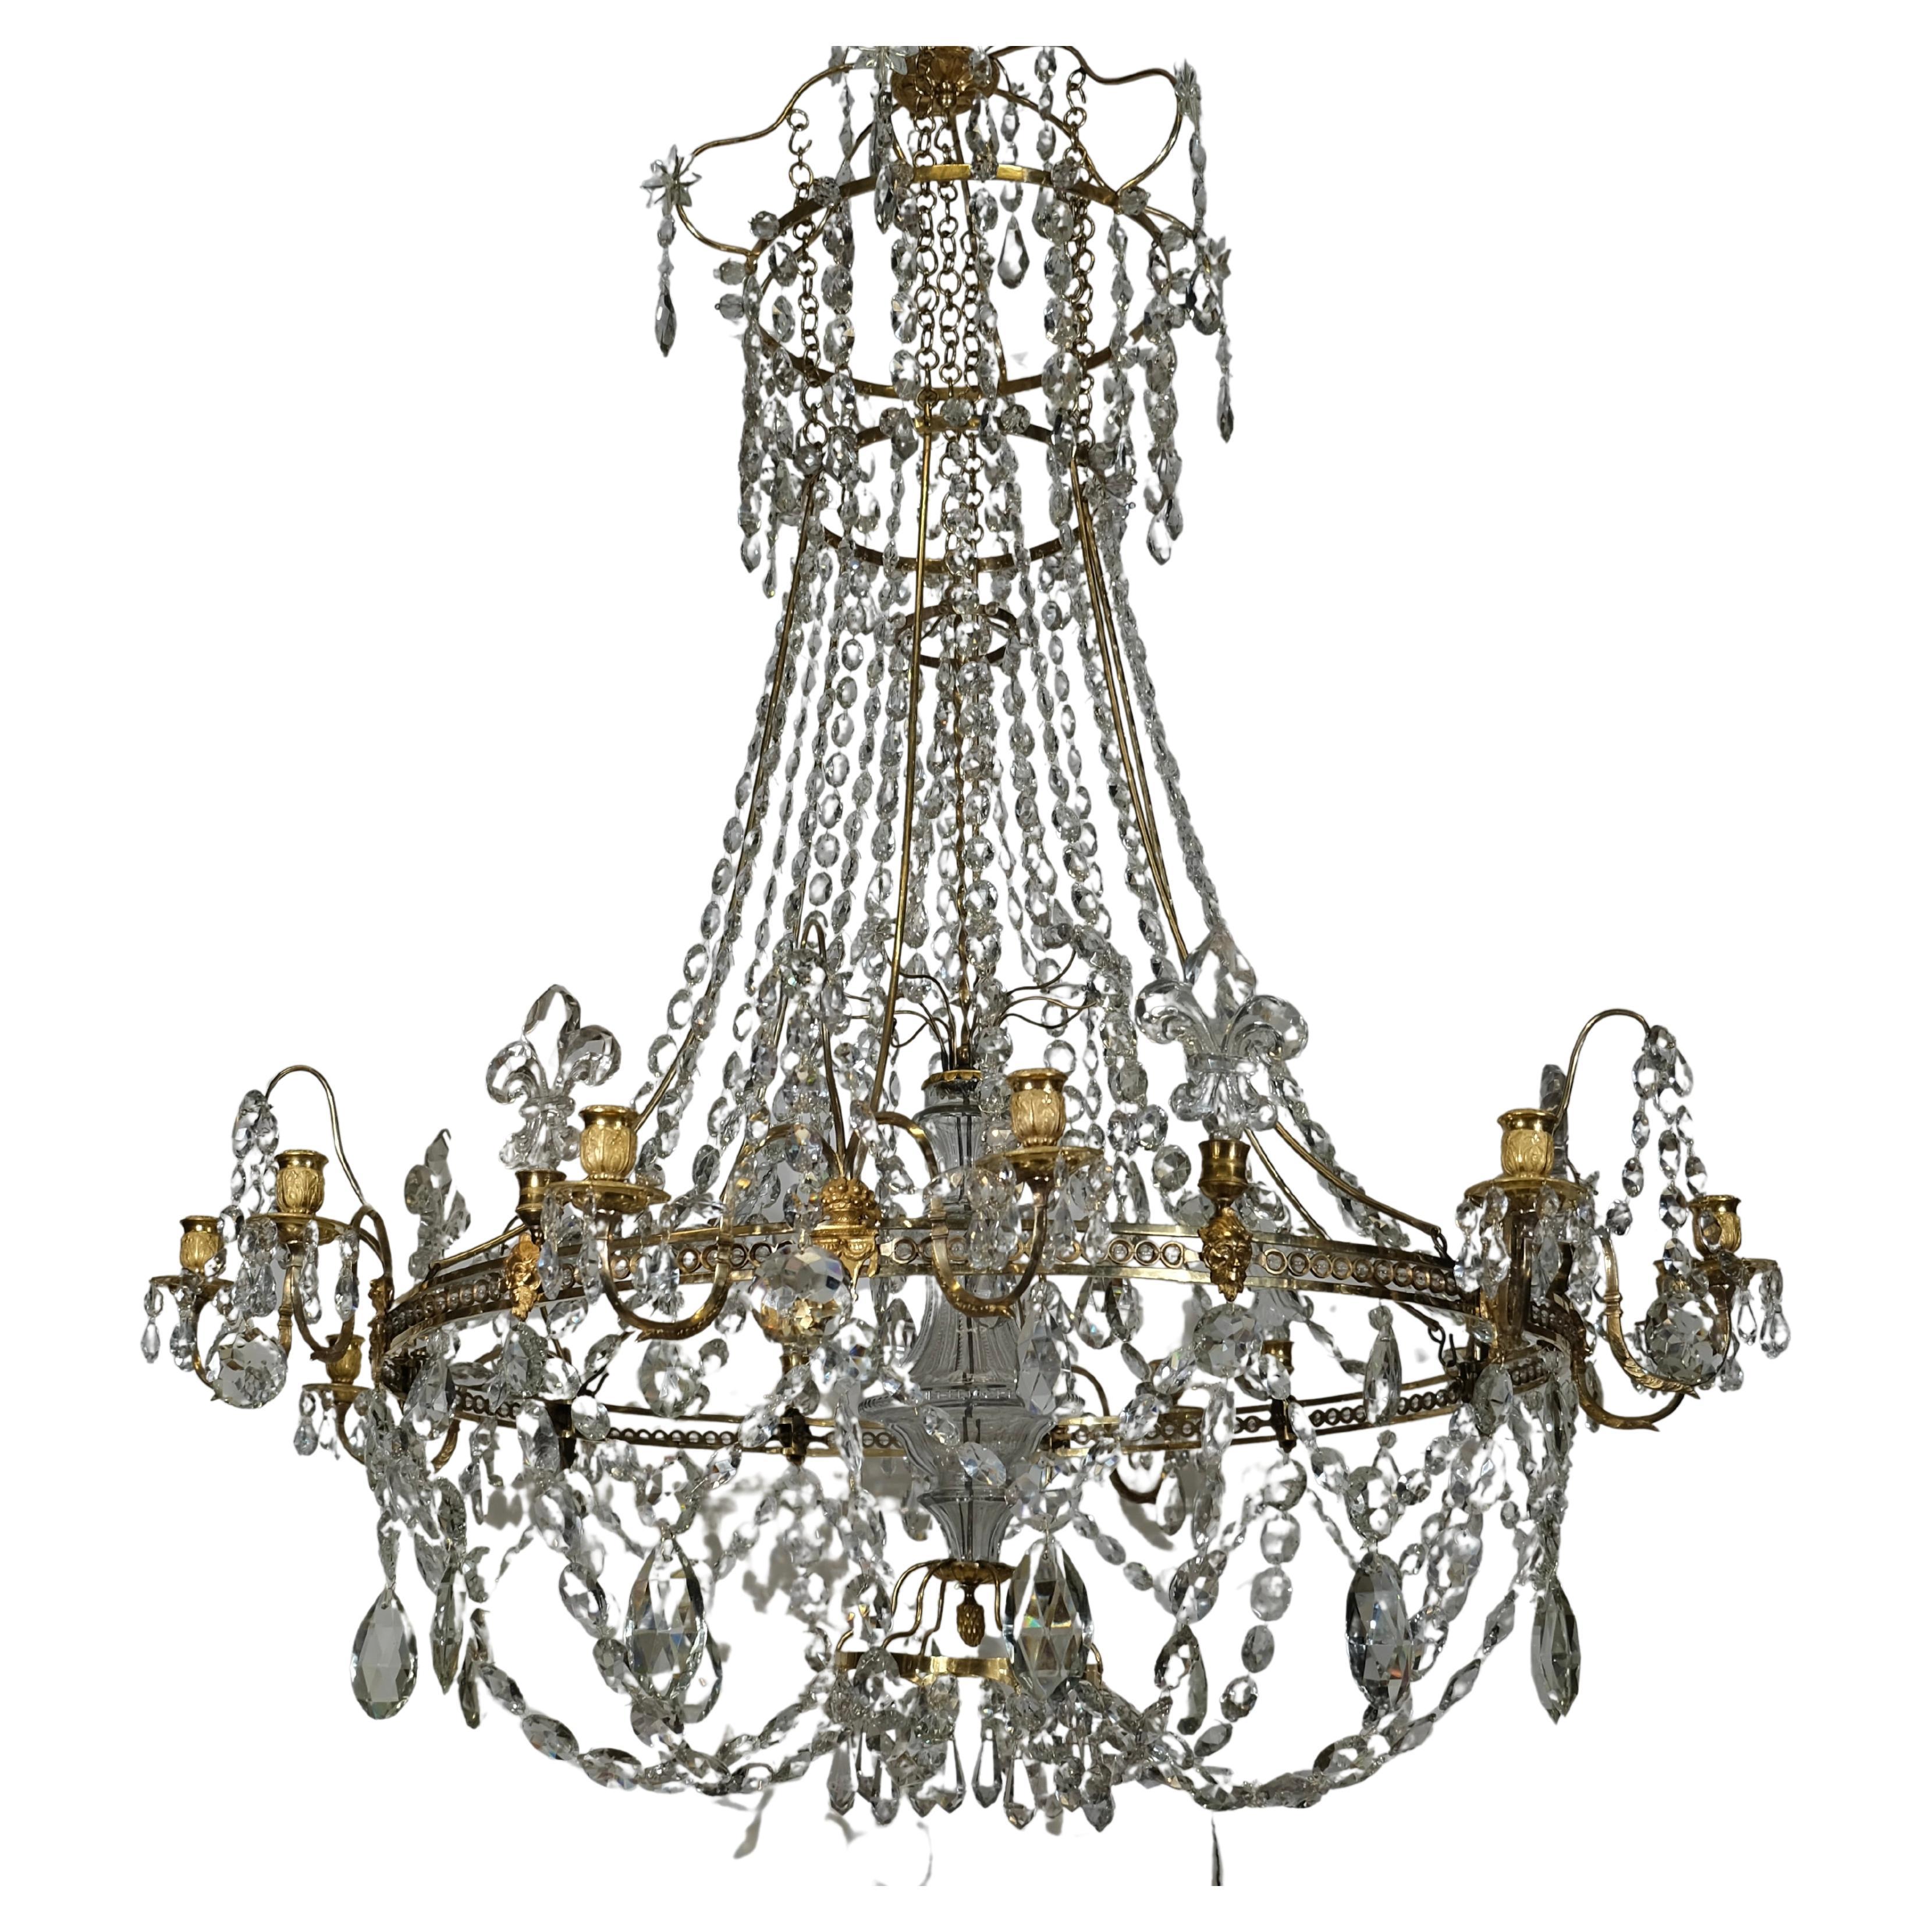 The handmade crystals adorning this magnificent Louis XVI chandelier are of unparalleled quality. Each crystal is a testament to the skill of the artisans who painstakingly shaped and polished them to perfection.

One of the distinguishing features